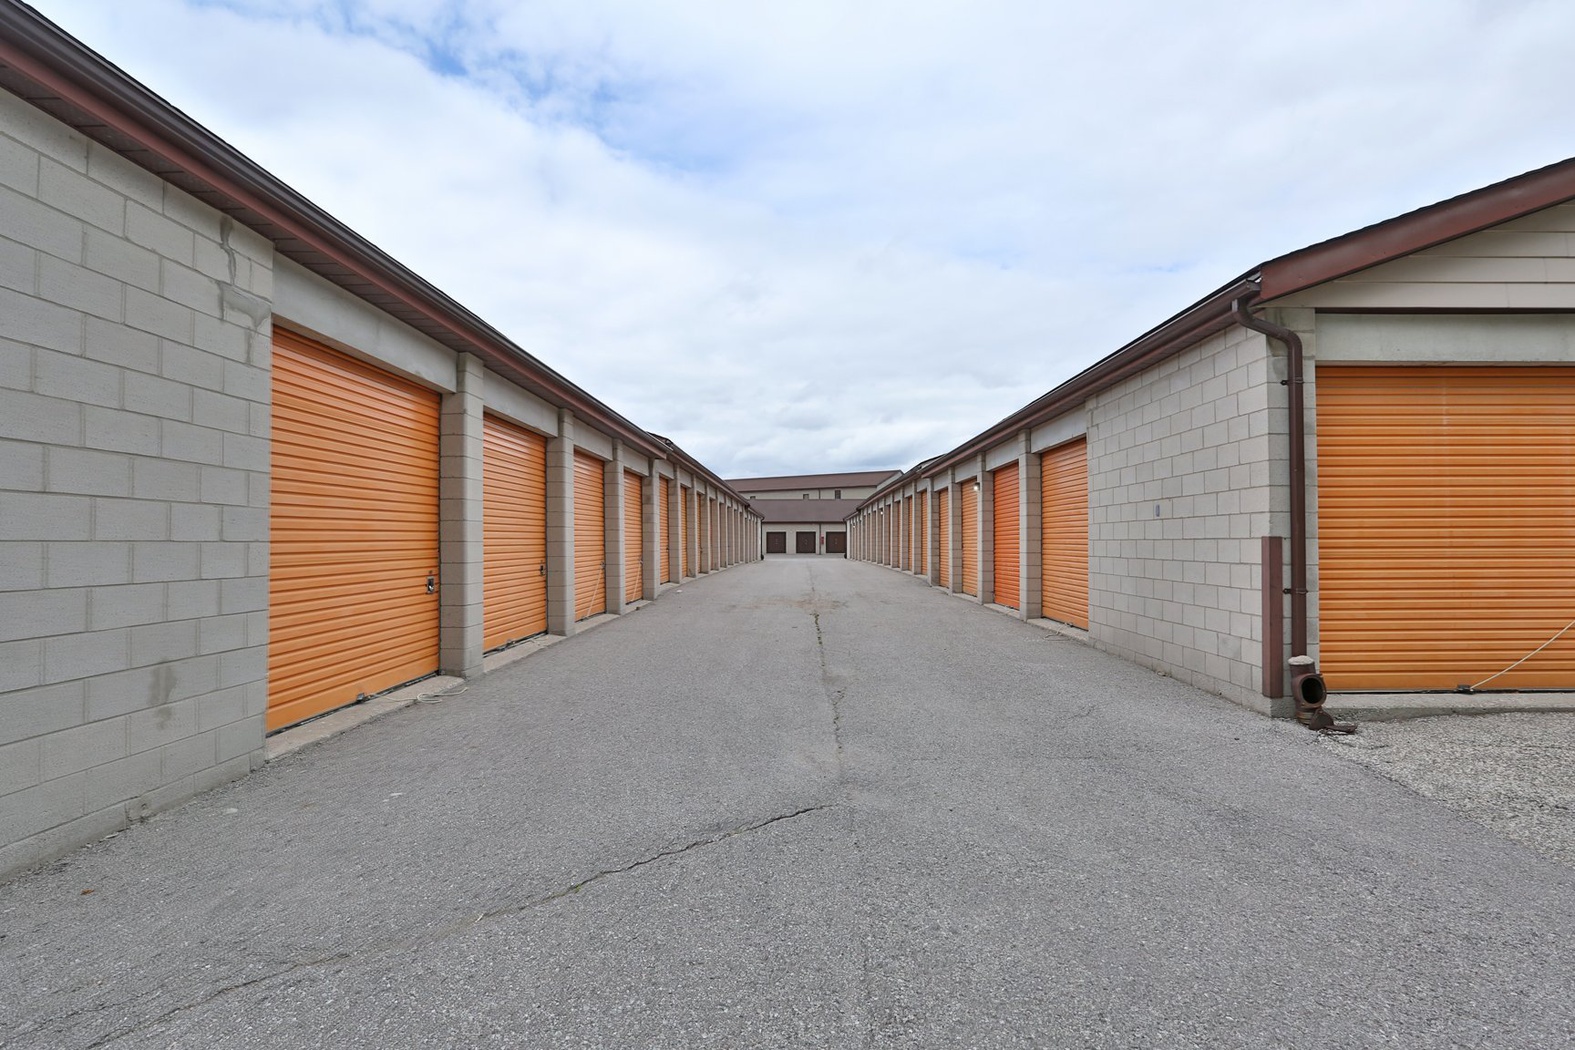 Images Access Storage - East York (Permanently Closed)